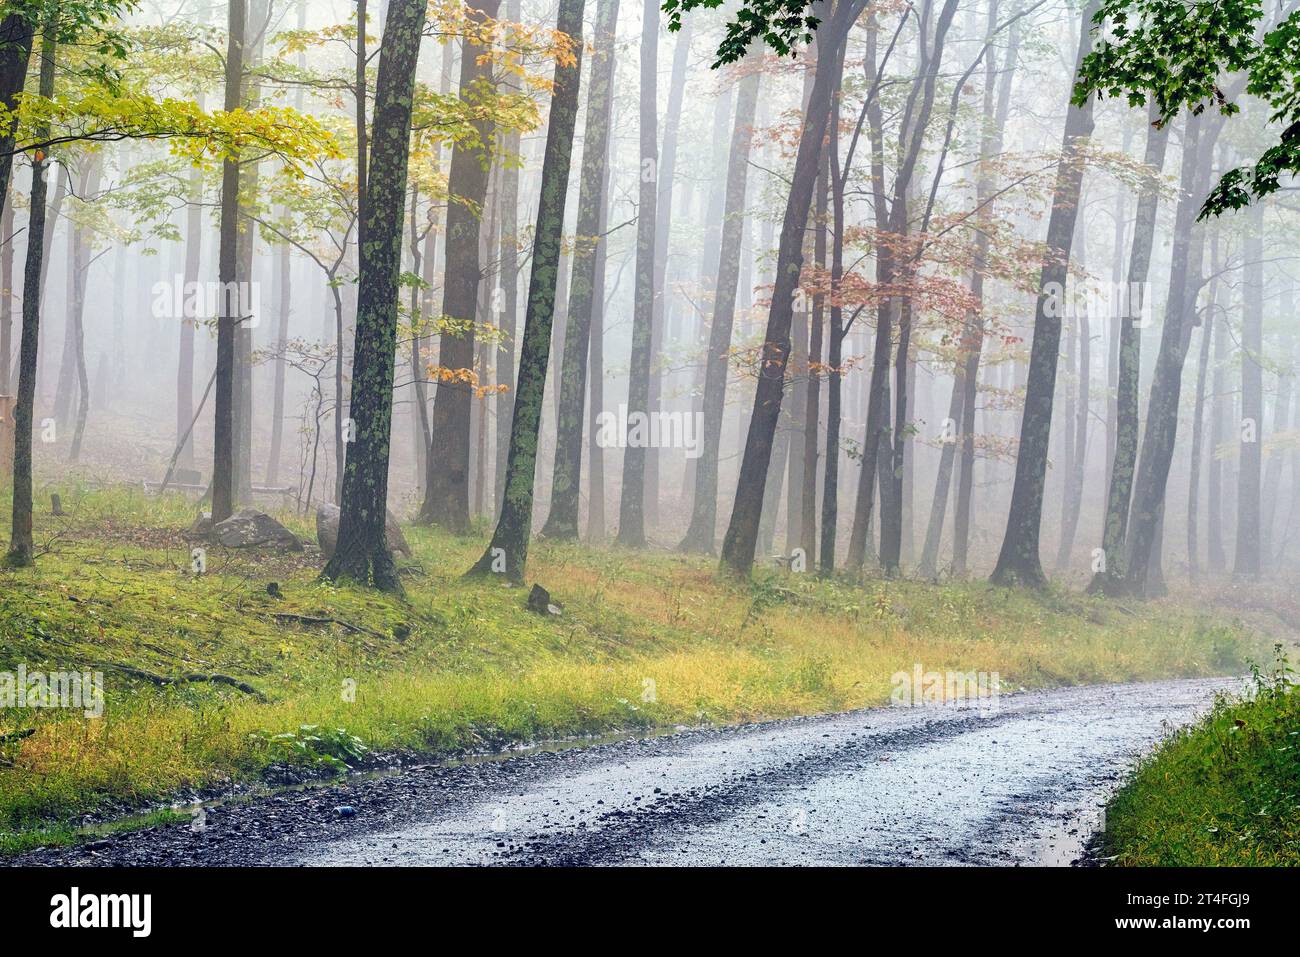 A remote gravel road curves through a foggy forest with trees displaying autumn foliage. Stock Photo